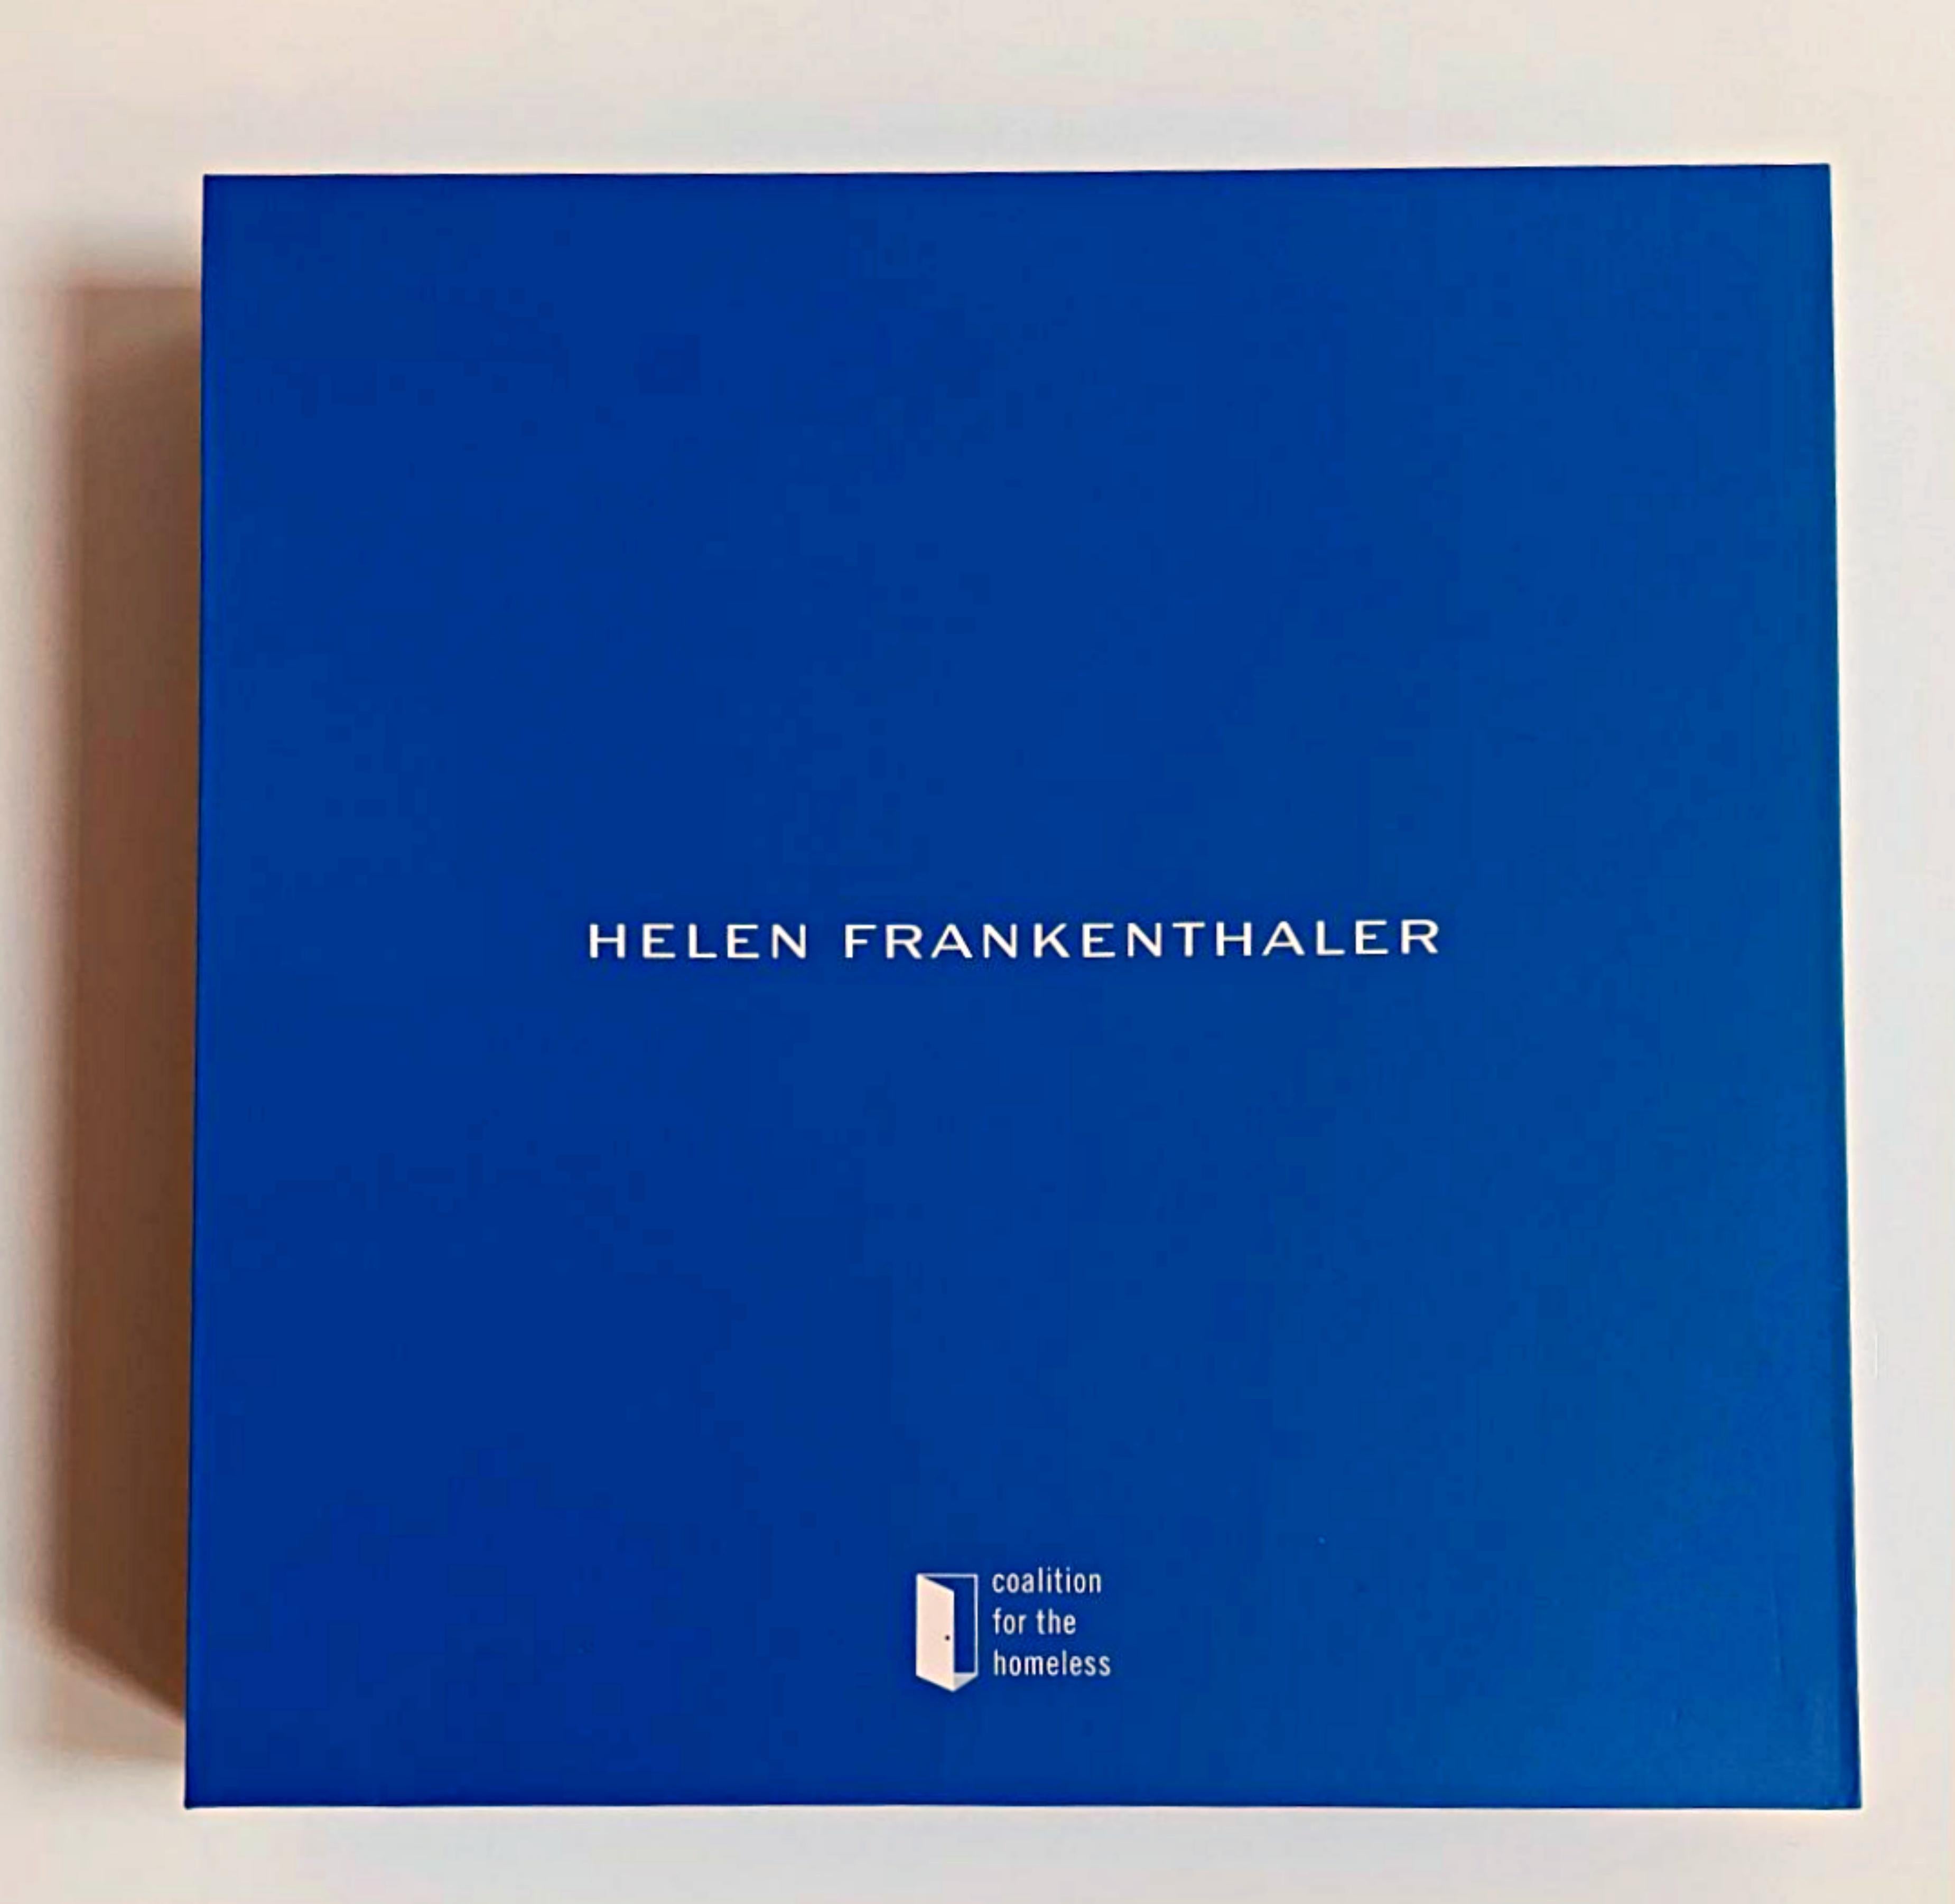 This porcelain/ceramic plate makes a gorgeous gift - in a bright blue bespoke box, ready to be gifted. Any fan of Helen Frankenthaler or Abstract Expressionist art would be thrilled!

Helen Frankenthaler
Acrobat (detail), Limited Edition Porcelain